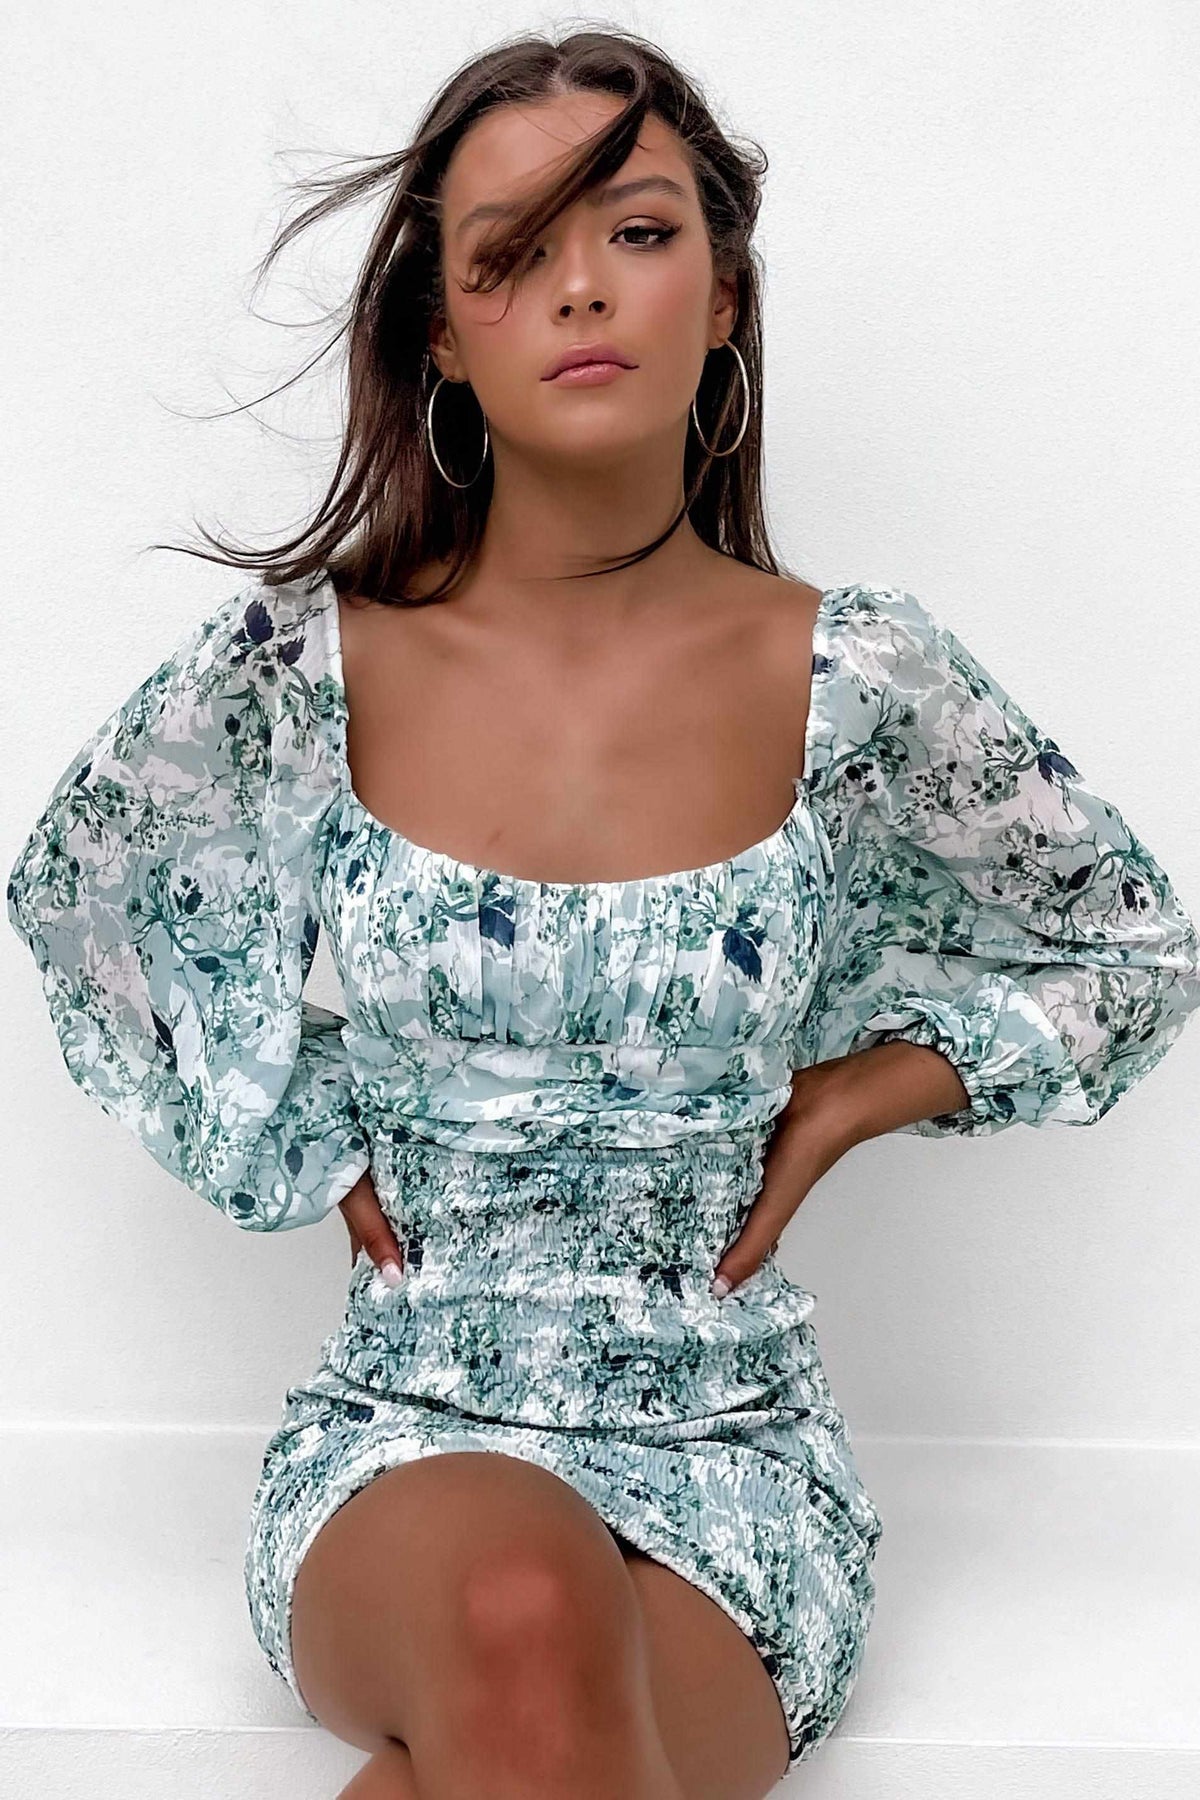 Auricle Dress, BALLOON SLEEVE, BLUE, DRESS, DRESSES, ELASTIC, GATHERED, LONG SLEEVE, NEW ARRIVALS, OFF SHOULDER, PATTERN, POLYESTER, Sale, Auricle Dress only $79.00 @ MISHKAH ONLINE FASHION BOUTIQUE, Shop The Latest Women&#39;s Dresses - Our New Auricle Dress is only $79.00, @ MISHKAH ONLINE FASHION BOUTIQUE-MISHKAH